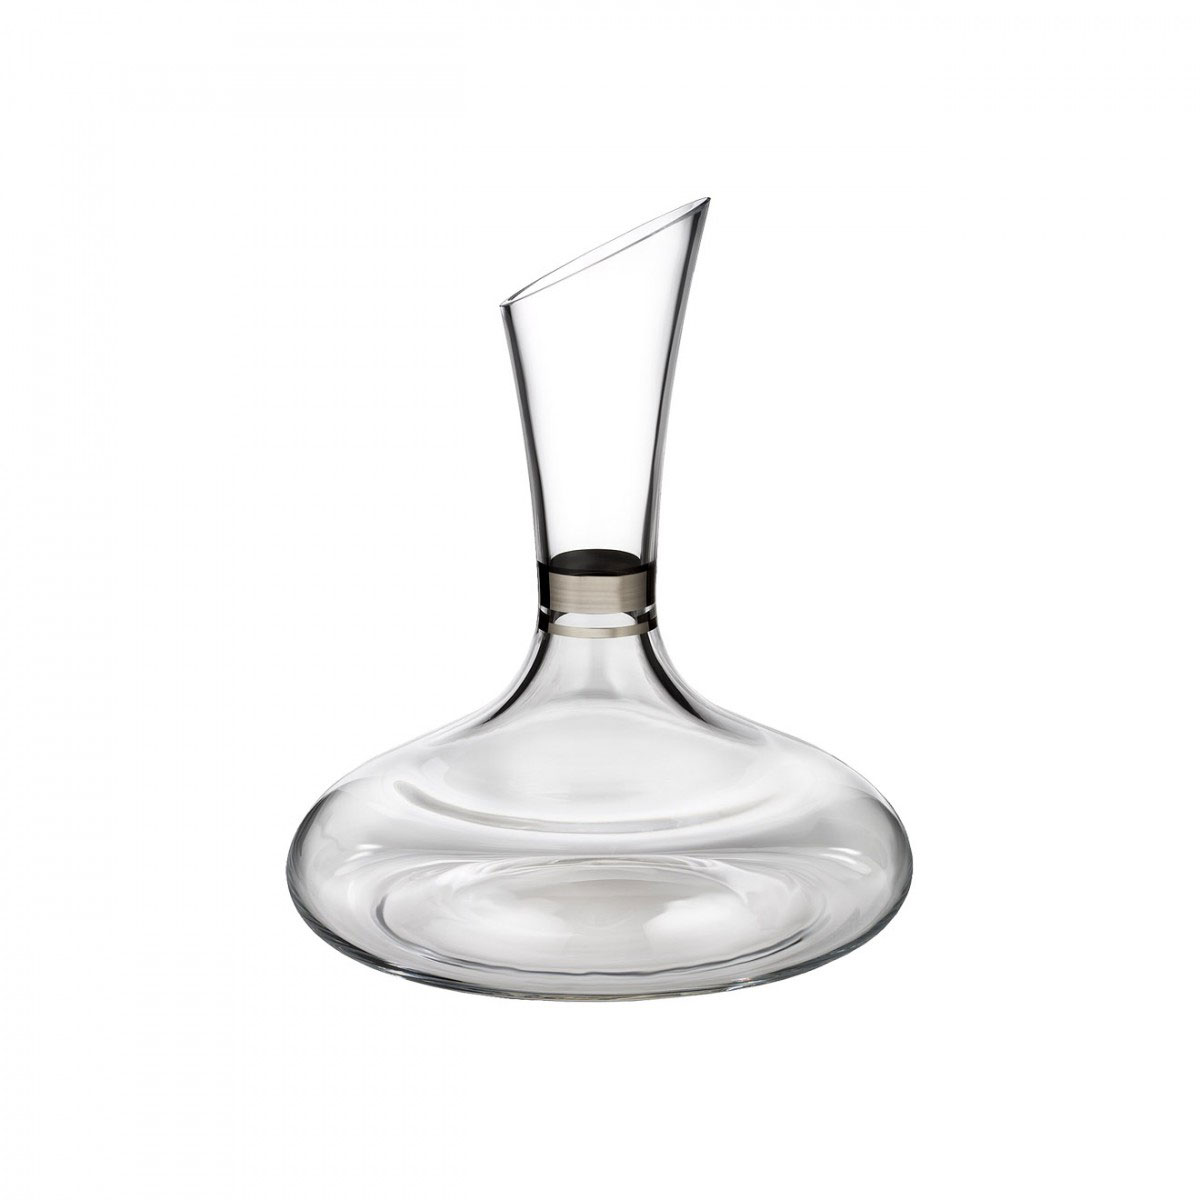 Waterford Crystal, Elegance Wine Carafe Decanter With Platinum Band